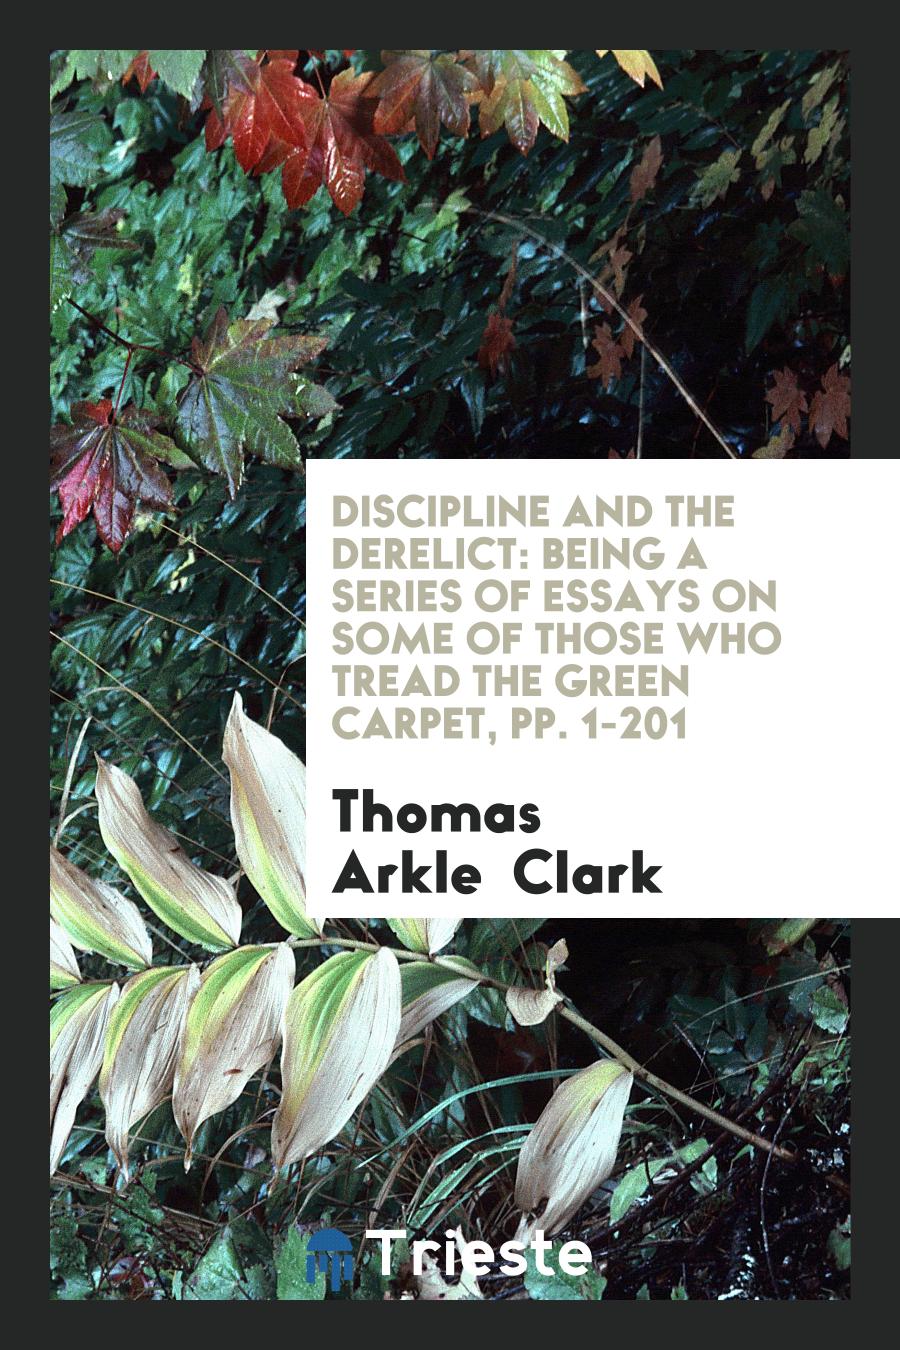 Discipline and the Derelict: Being a Series of Essays on Some of Those Who Tread the Green Carpet, pp. 1-201